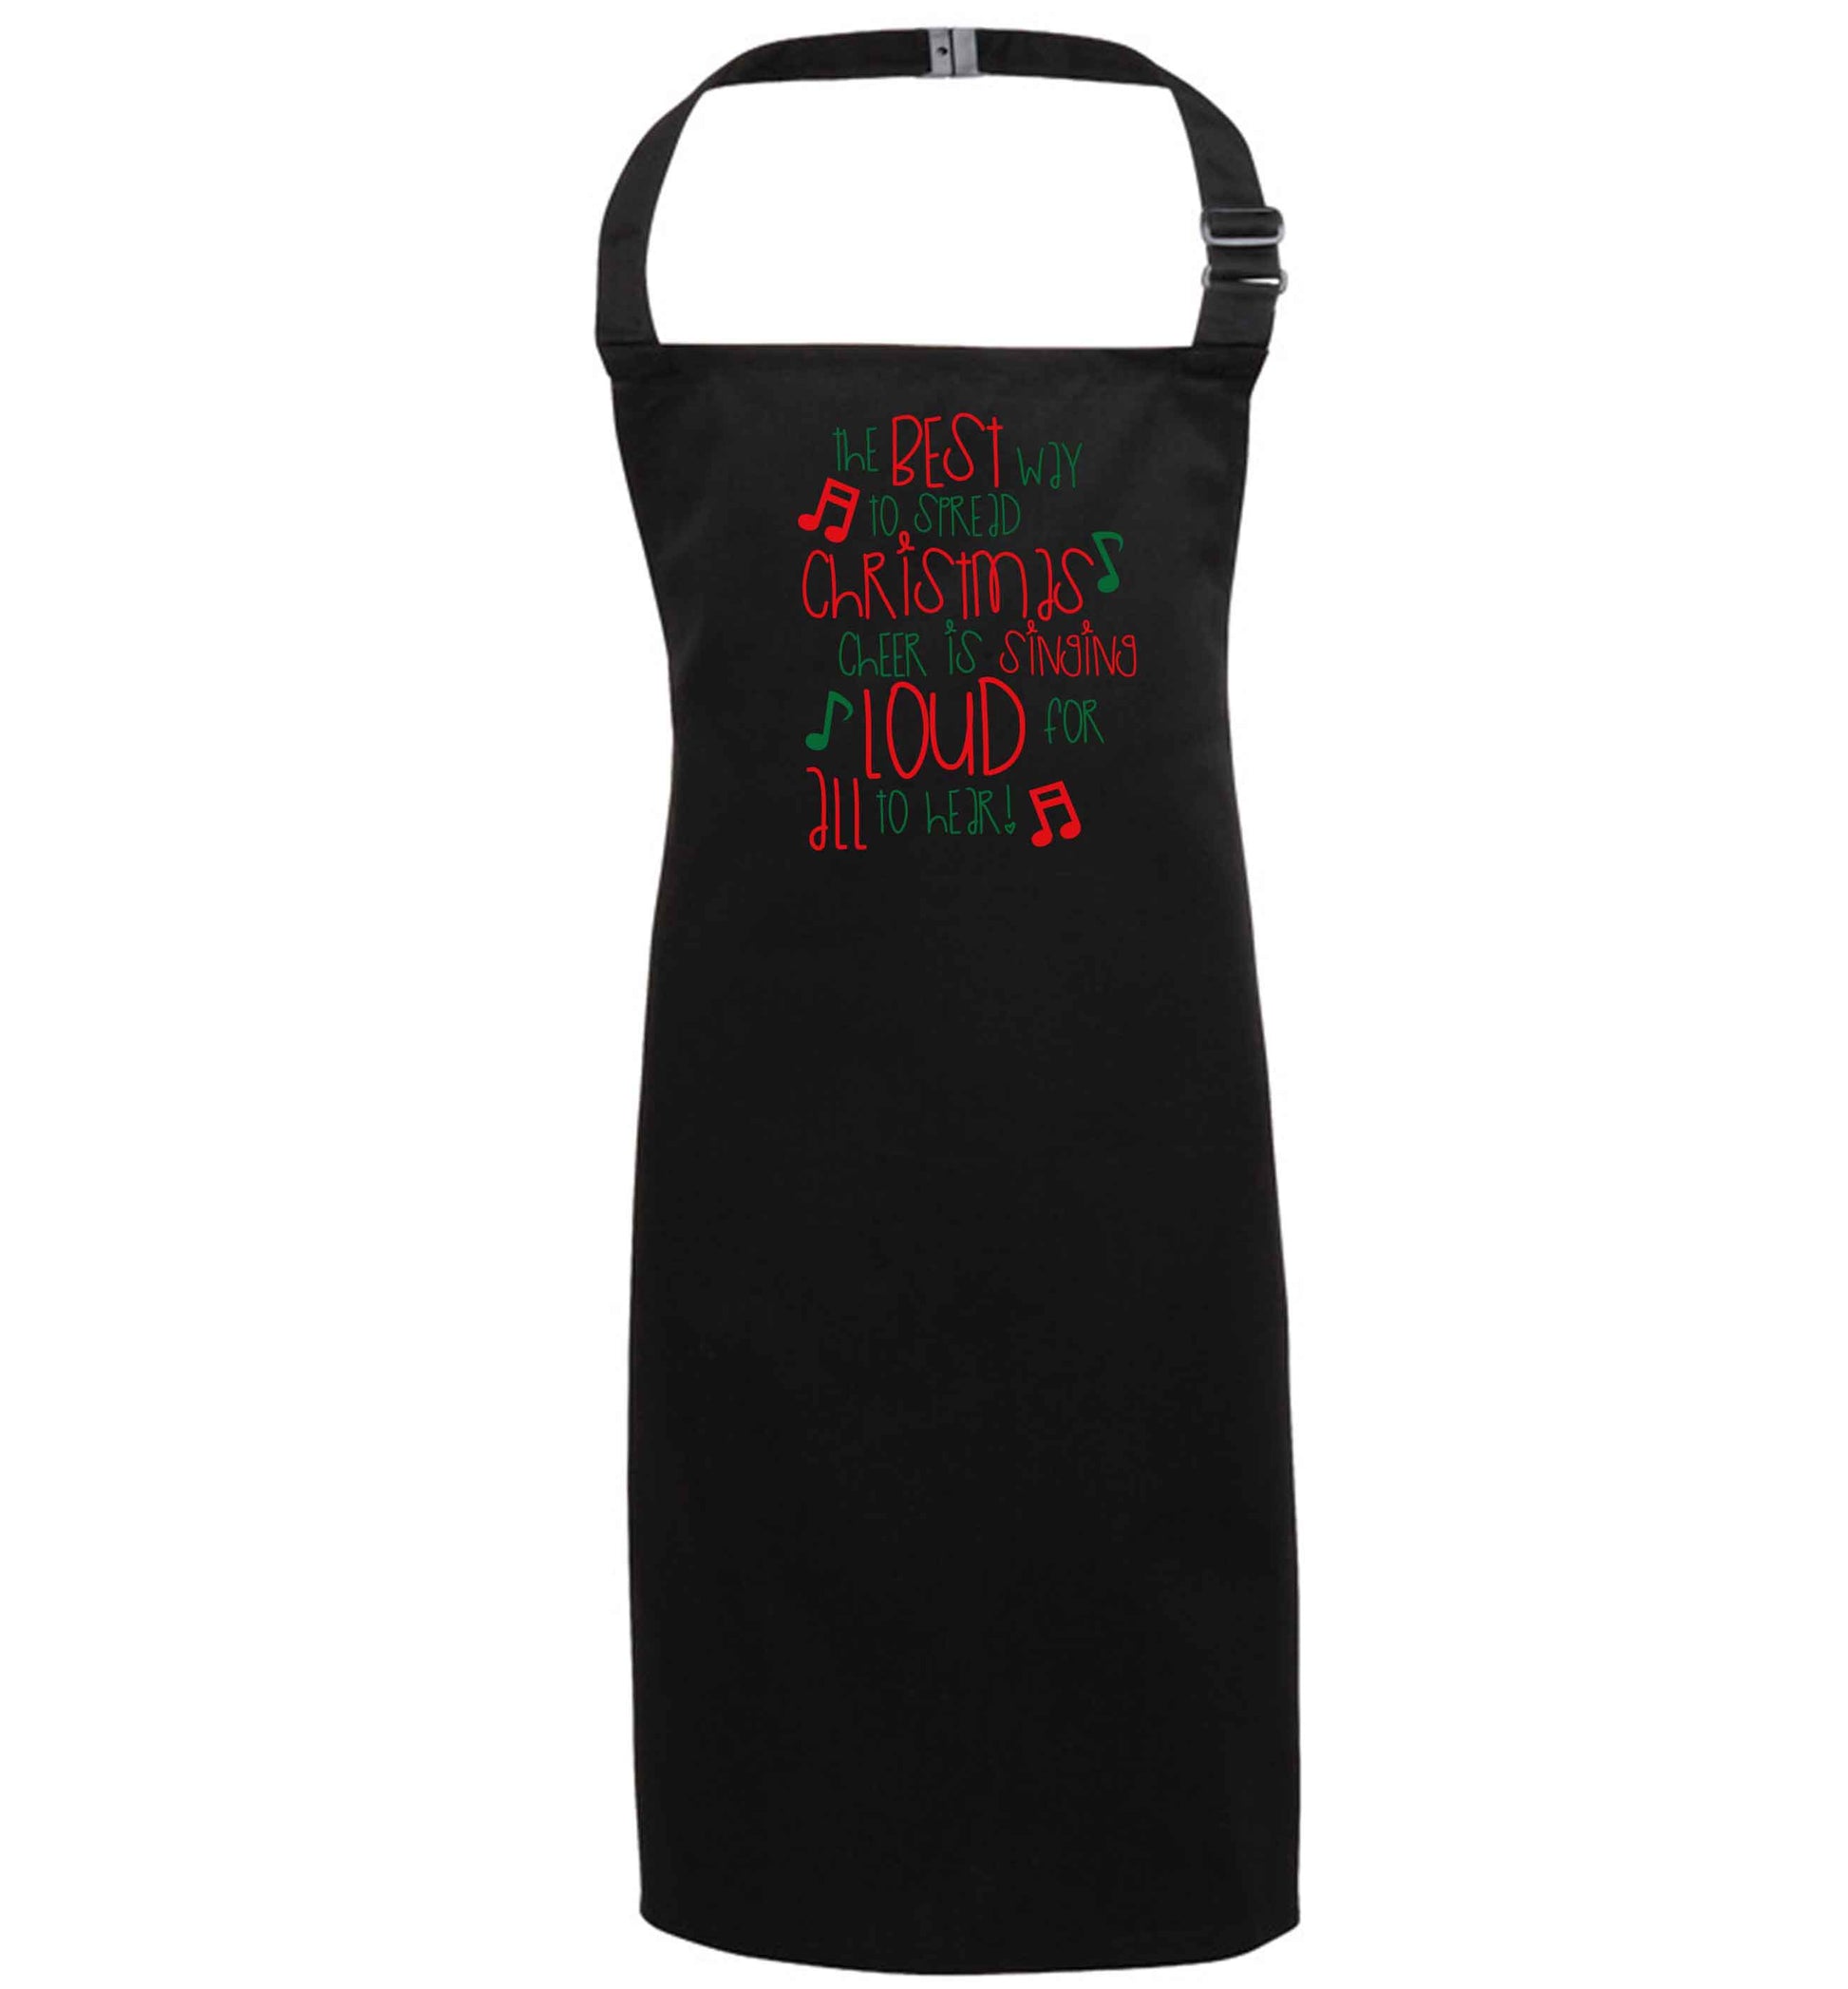 The best way to spread Christmas cheer is singing loud for all to hear black apron 7-10 years